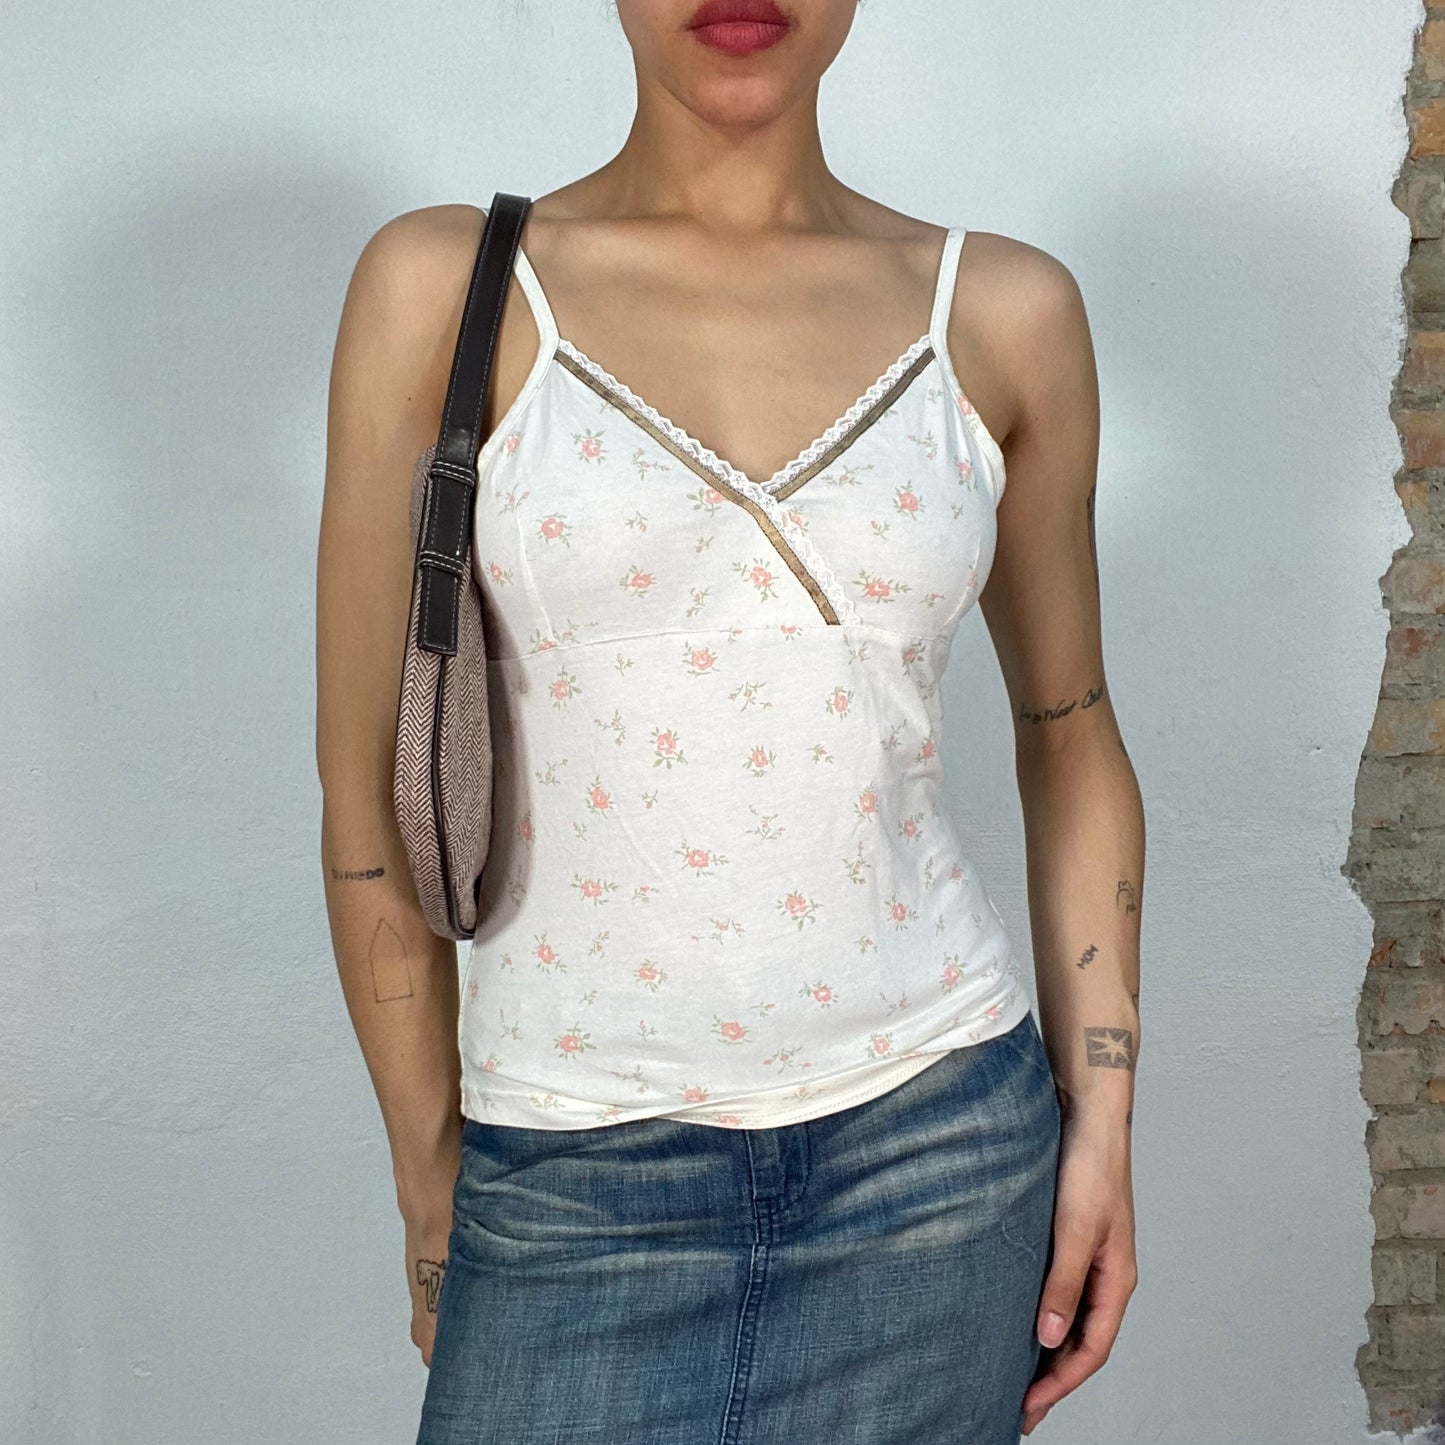 Vintage 90's Soft Girl White Cami Top with Small Flower Print (S/M)